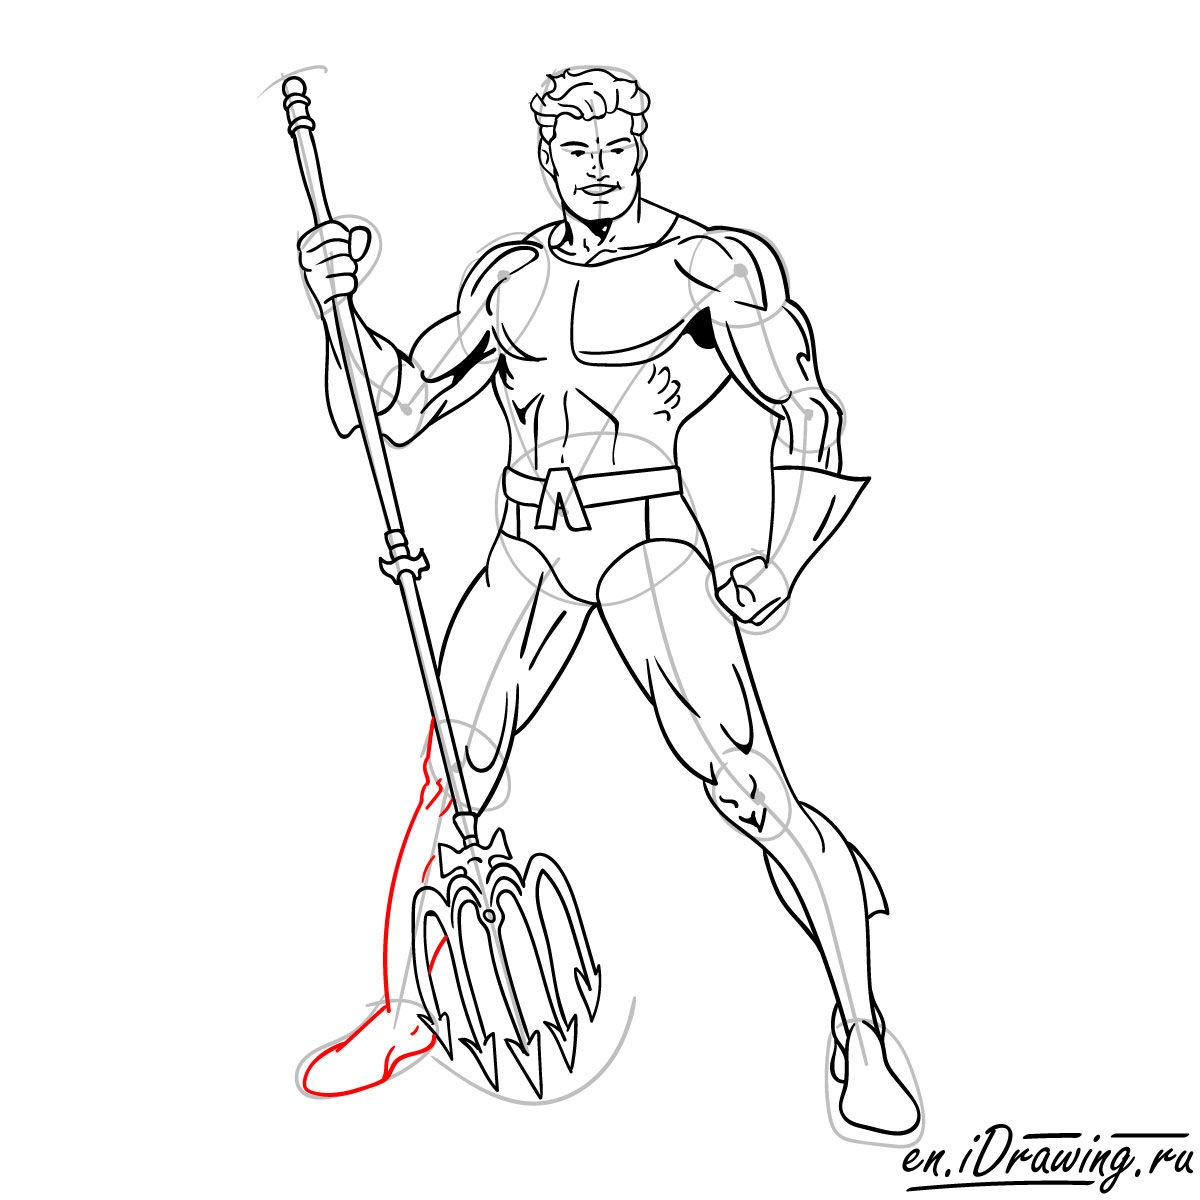 How to draw Aquaman from cartoons and comic books - step 17